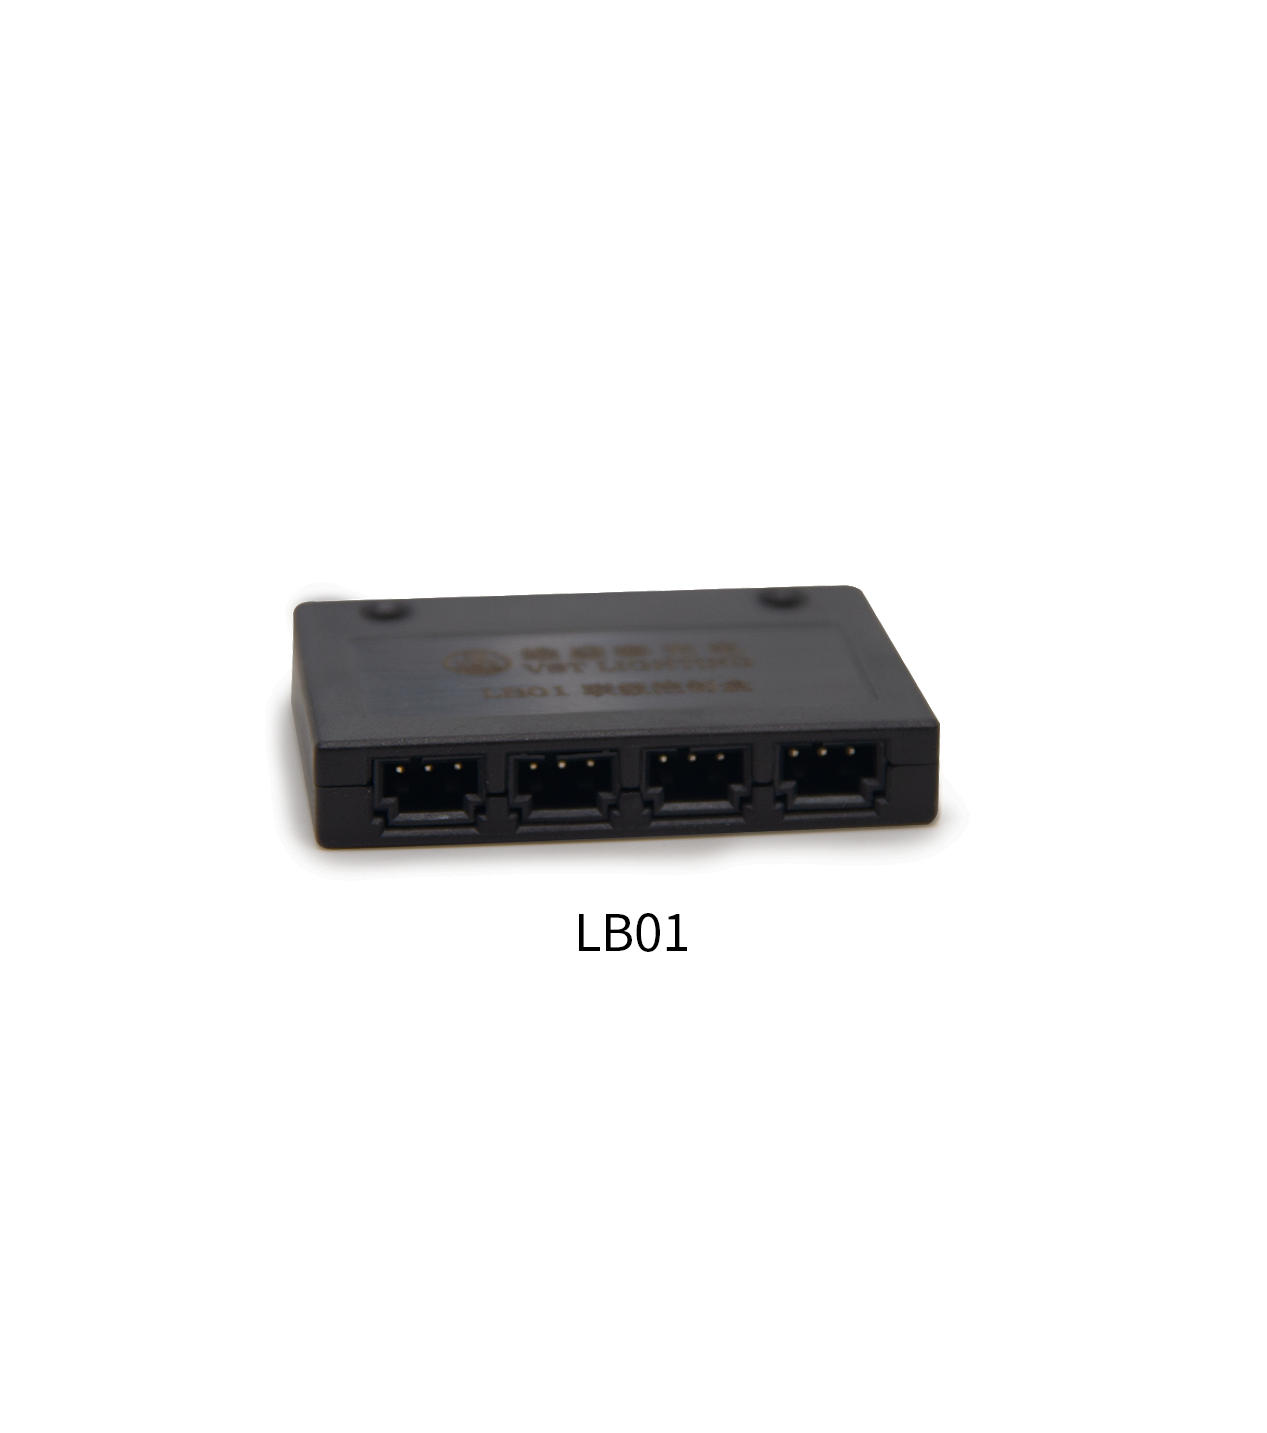 Send an inquiry for 12V/24V Multi LED Driver Control Box 4 Ports Driver Connector Linker 55*38*10mm to high quality LED Driver Control Box supplier. WholesaleDriver Connector Linker directly from China LED Driver Control Box manufacturers and exporters. Get a factory sale price list and become a distributor/agent-vstled.com.